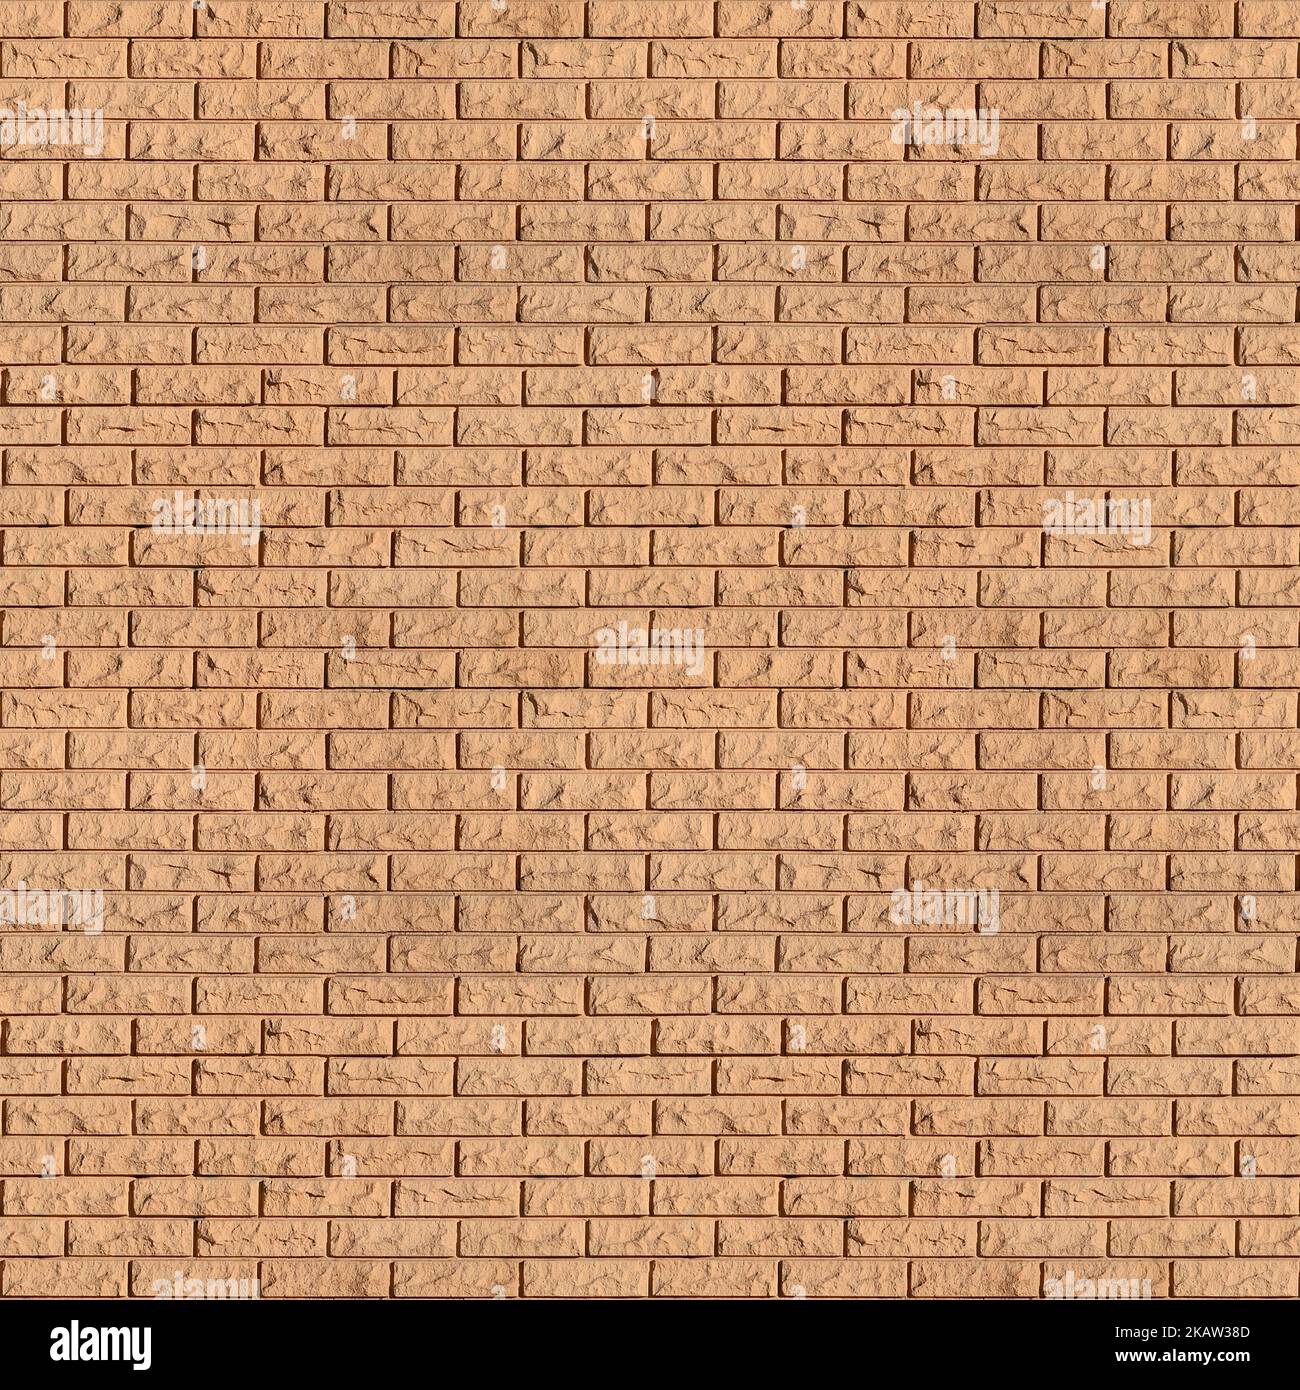 Weathered stained old brown brick wall background. Texture of an old wall of several floors with lots of rows of brown bricks Stock Photo